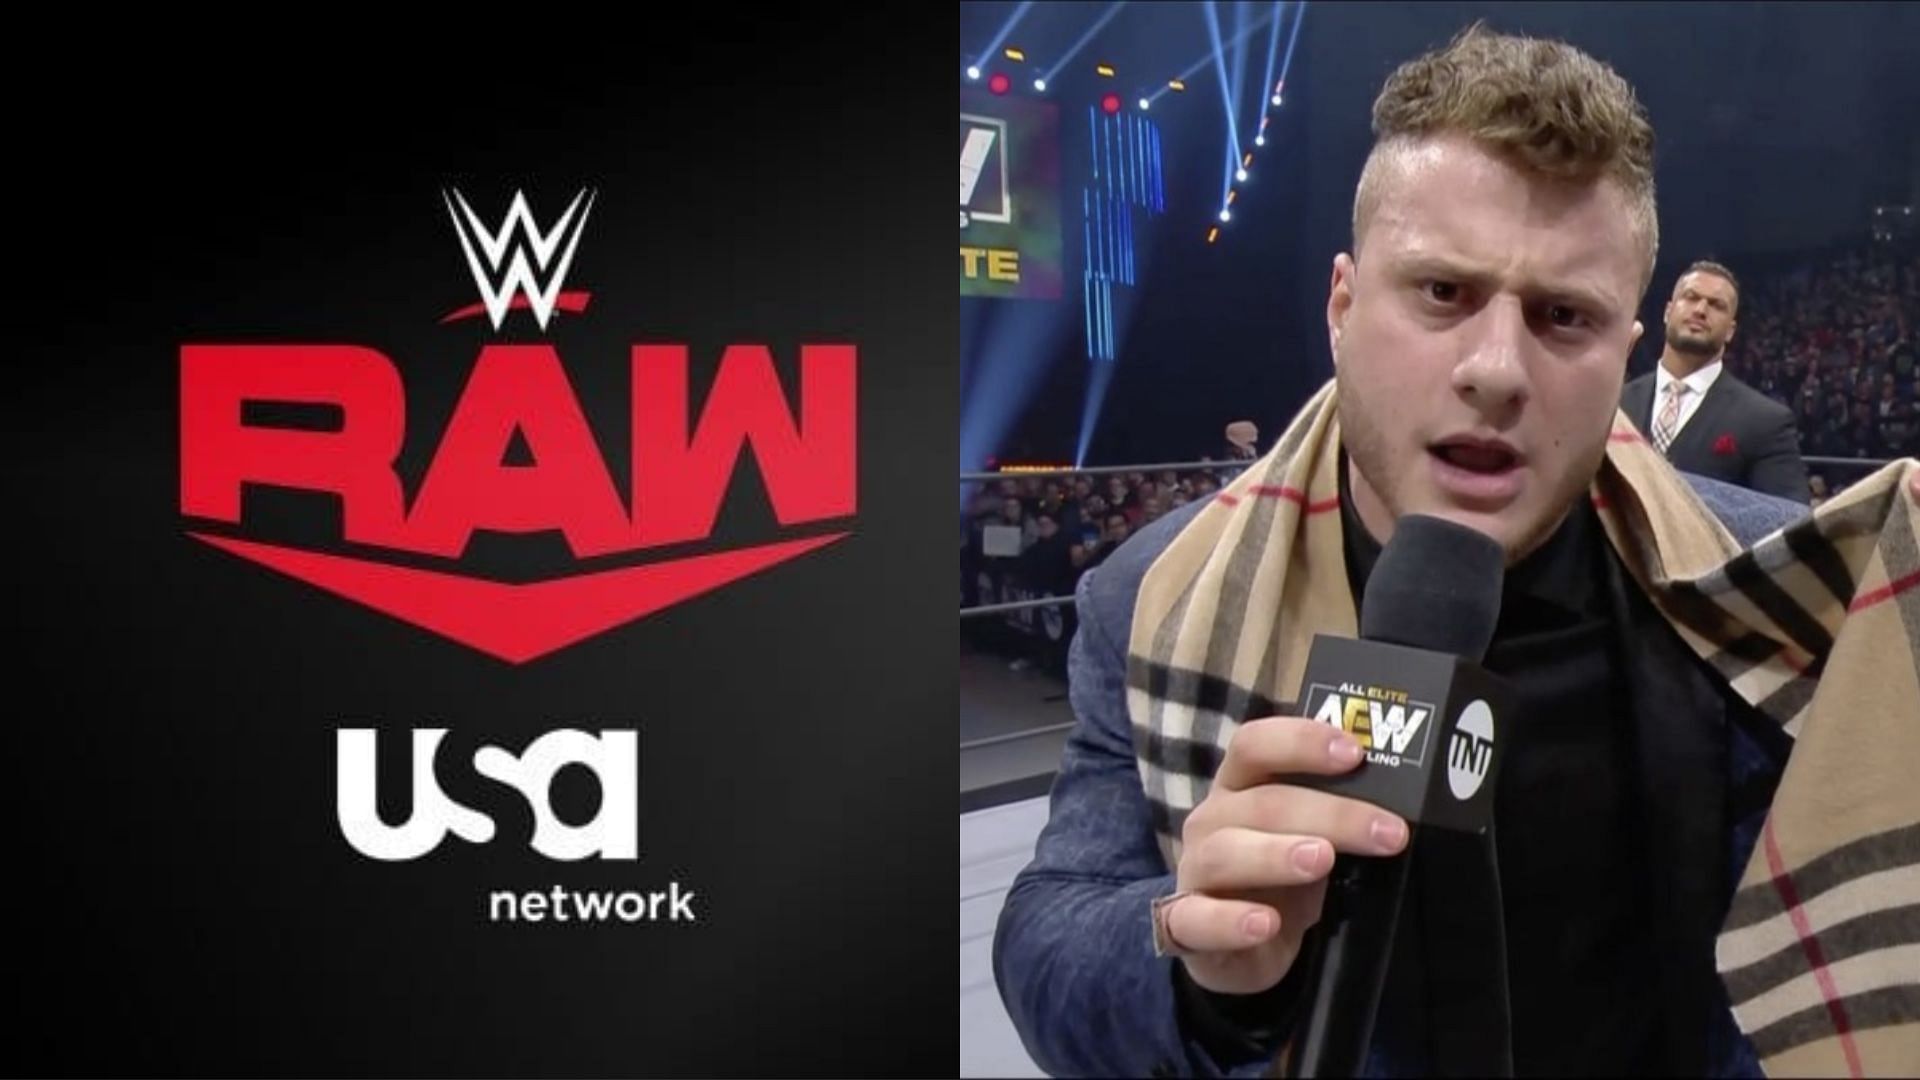 MJF has the opportunity to challenge for the AEW World Championship down the road